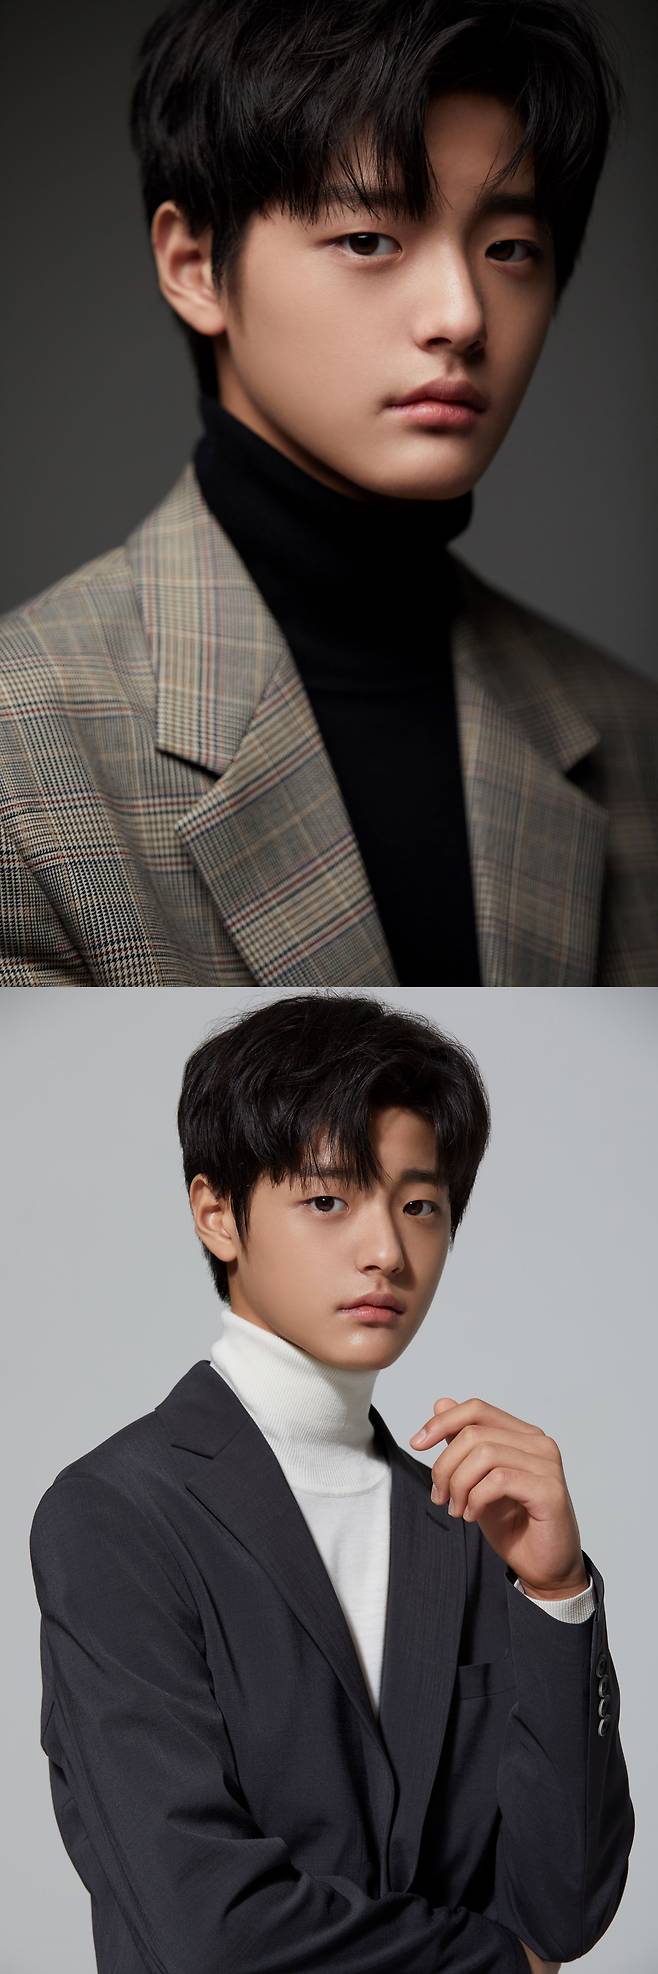 A new profile photo of Actor Park Sang Hoons various charms has been released.In a profile photo released by the Ways Company on its official Instagram account on Tuesday, Park Sang Hoon proved storm growth with a formal suit, casual style, and a tall physical.The beauty of the boy, the fresh and chic charm, gave off a more mature presence, especially the deep eyes and the warm visuals of the clear eyes.Park Sang Hoon has been well received by the audience for his casting as a young earl, a child of Kwon Sang-woo, through a competition of 1,000 to 1 in the movie One Number of Gods: A Few Features, and delicate emotional acting that is not childlike.In addition, I have accumulated the experience of acting as a child of actors such as Lee Byung-hun, Kim Soo-hyun, Kim Sung-gyun, and Cho Jung-seok in various genres such as movies House on Time, Only My World, Daeripun, drama Mokdu Flower, Chosun Hall of Fame, Hwagi, UntouchableEspecially, SBS Do you like Brahms? And Flying and Going attracted attention with the high synchro rate, realizing the childhood of Kim Min-jae and Kwon Sang-woo.Currently, KBS The River with the Moon is a prince of Pyeong-gang (Kim So-hyun), and later played the role of the 26th Nutrition King of Goguryeo, missing his sister who was separated as a child and showing delicate emotional acting.Park Sang Hoon, who has returned to the palace after regaining his memory, is in a full-fledged political battle with Pyeong-gang and Ko Won-pyo, and hopes are rising to draw a complicated prince who wants to live as an ordinary boy rather than a prince.The River with the Moon is broadcast every Monday and Tuesday at 9:30 pm.photoways company